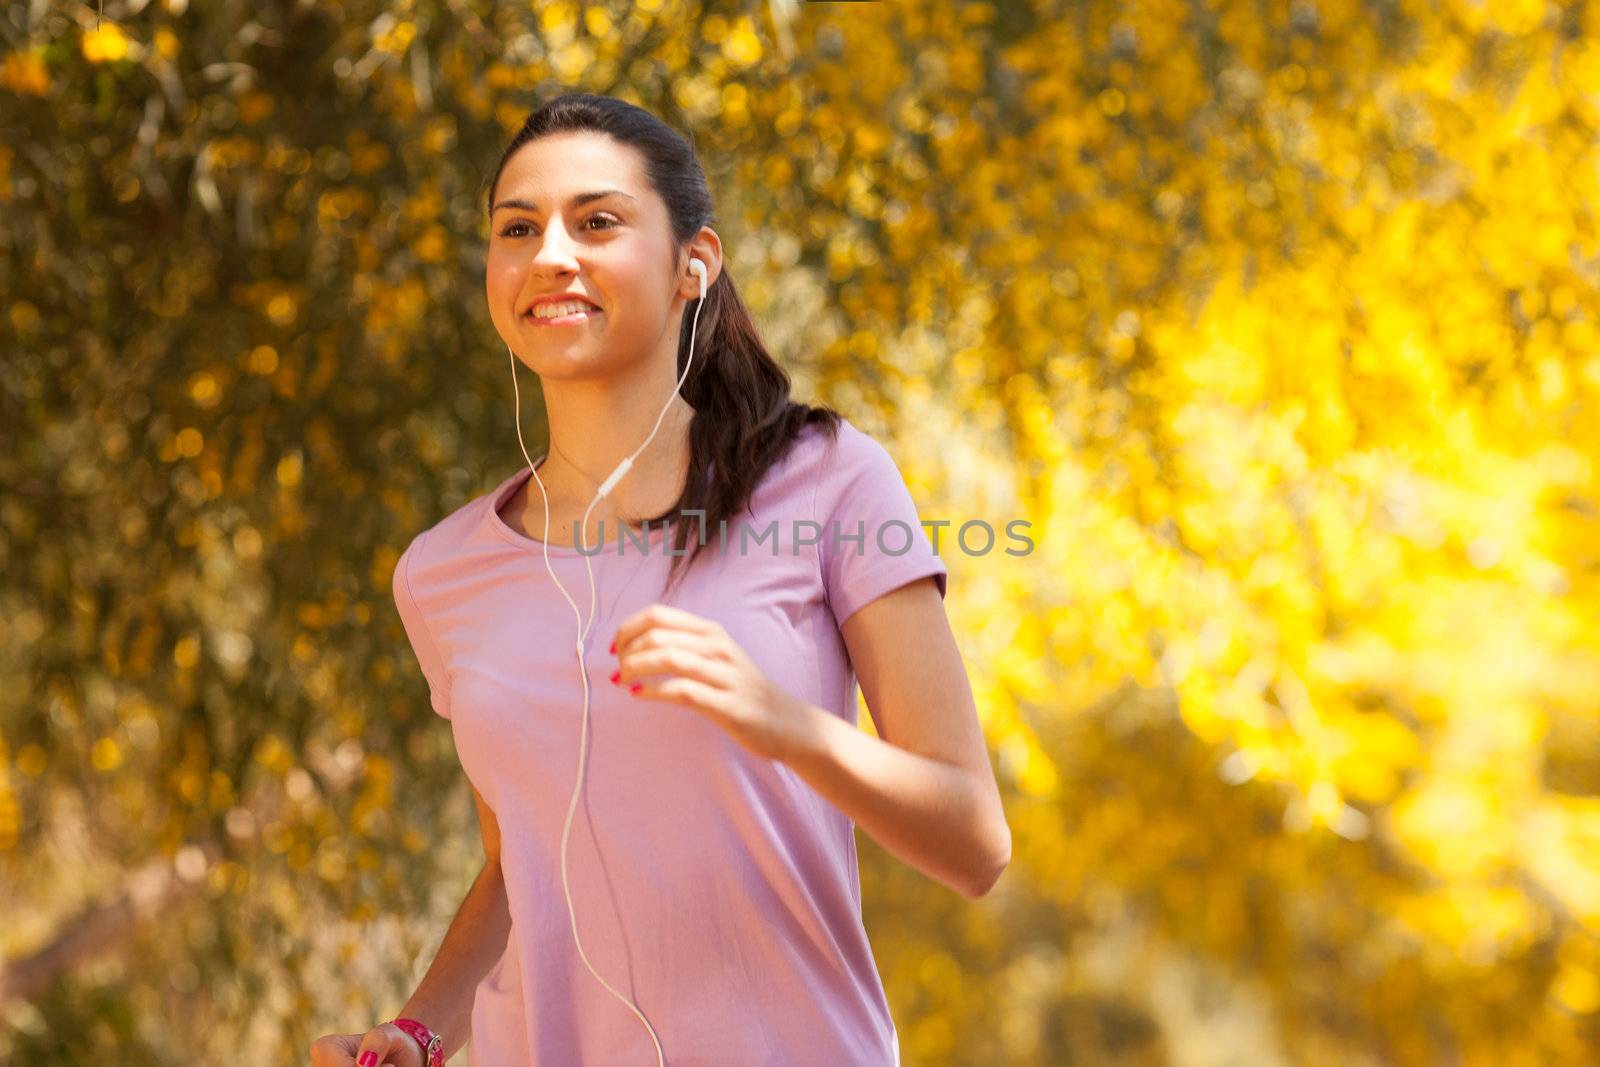 young beautiful woman jogging by Lcrespi